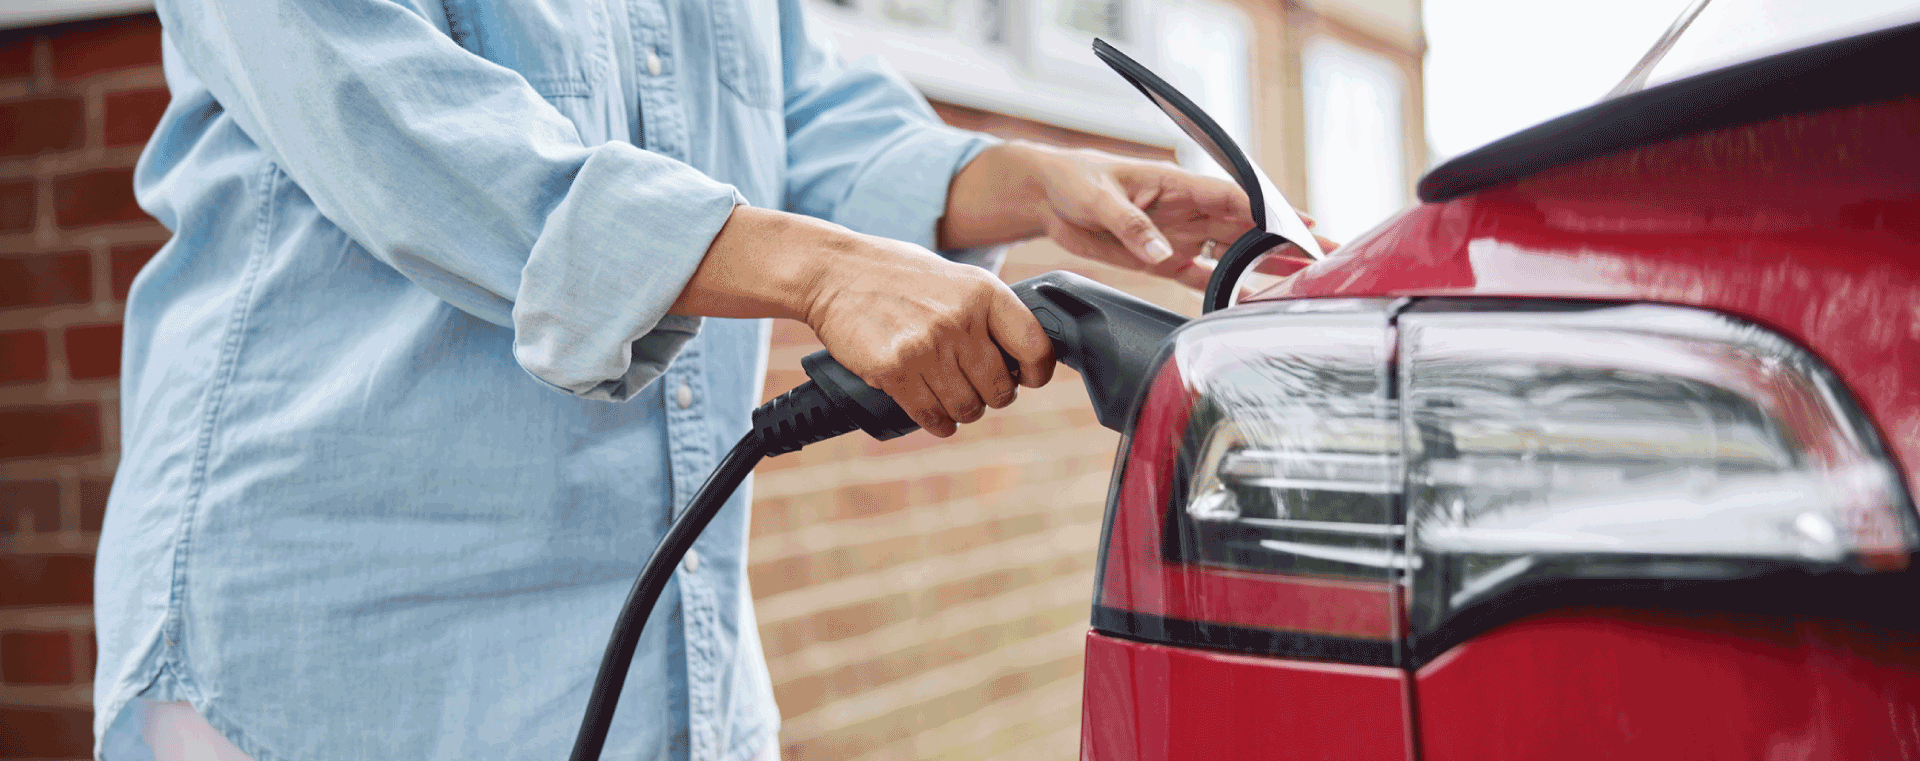 New 5 000 Rebate Announced To Help Deploy Public Electric Vehicle 